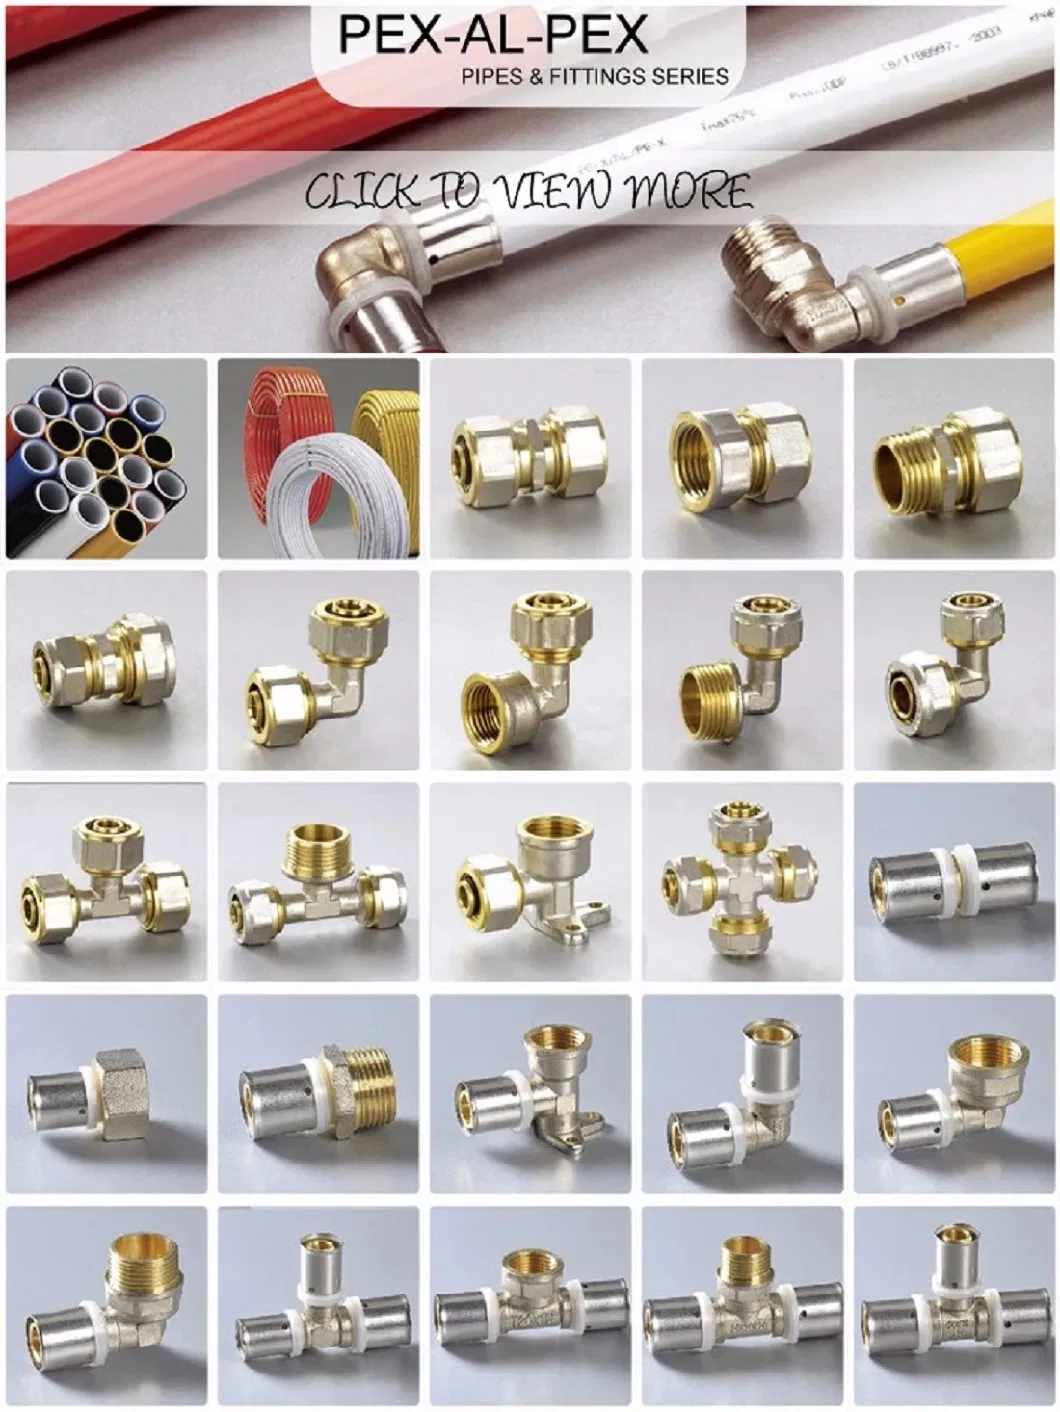 China Manufacturer Brass/Pipe/Hose Fitting Elbow Compression Brass Fittings for Pex-Al-Pex Multilayer/Composite Pipes